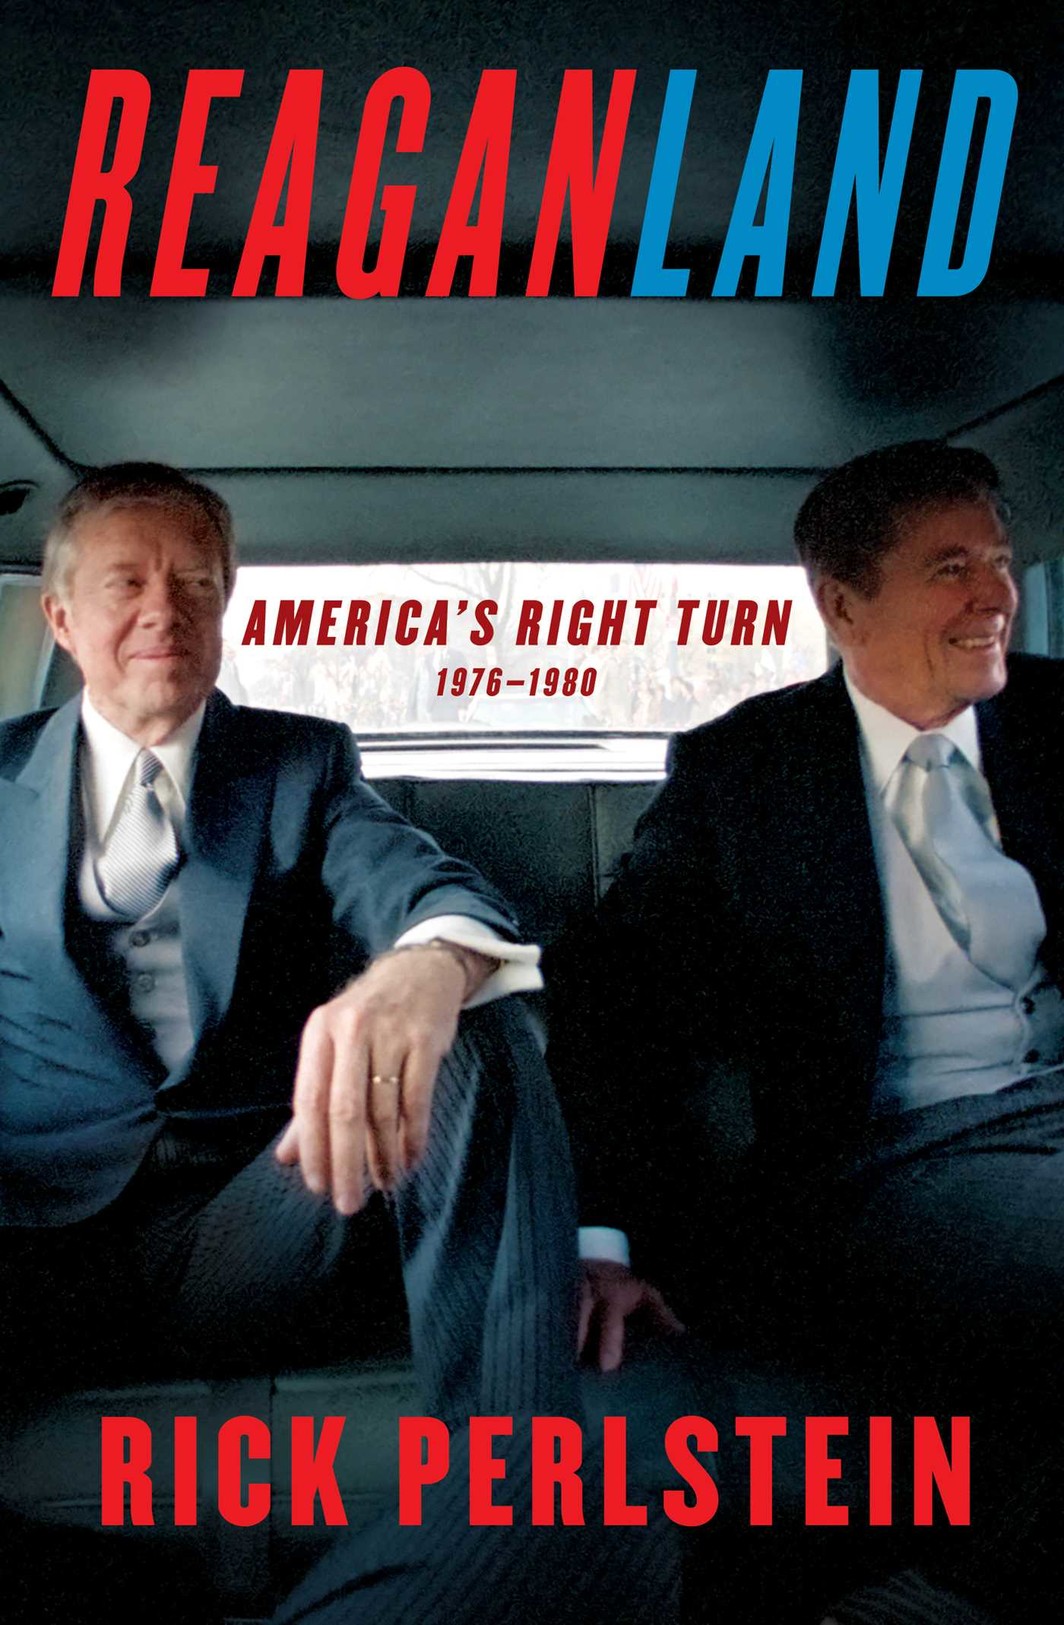 The cover of Reaganland: America's Right Turn 1976-1980